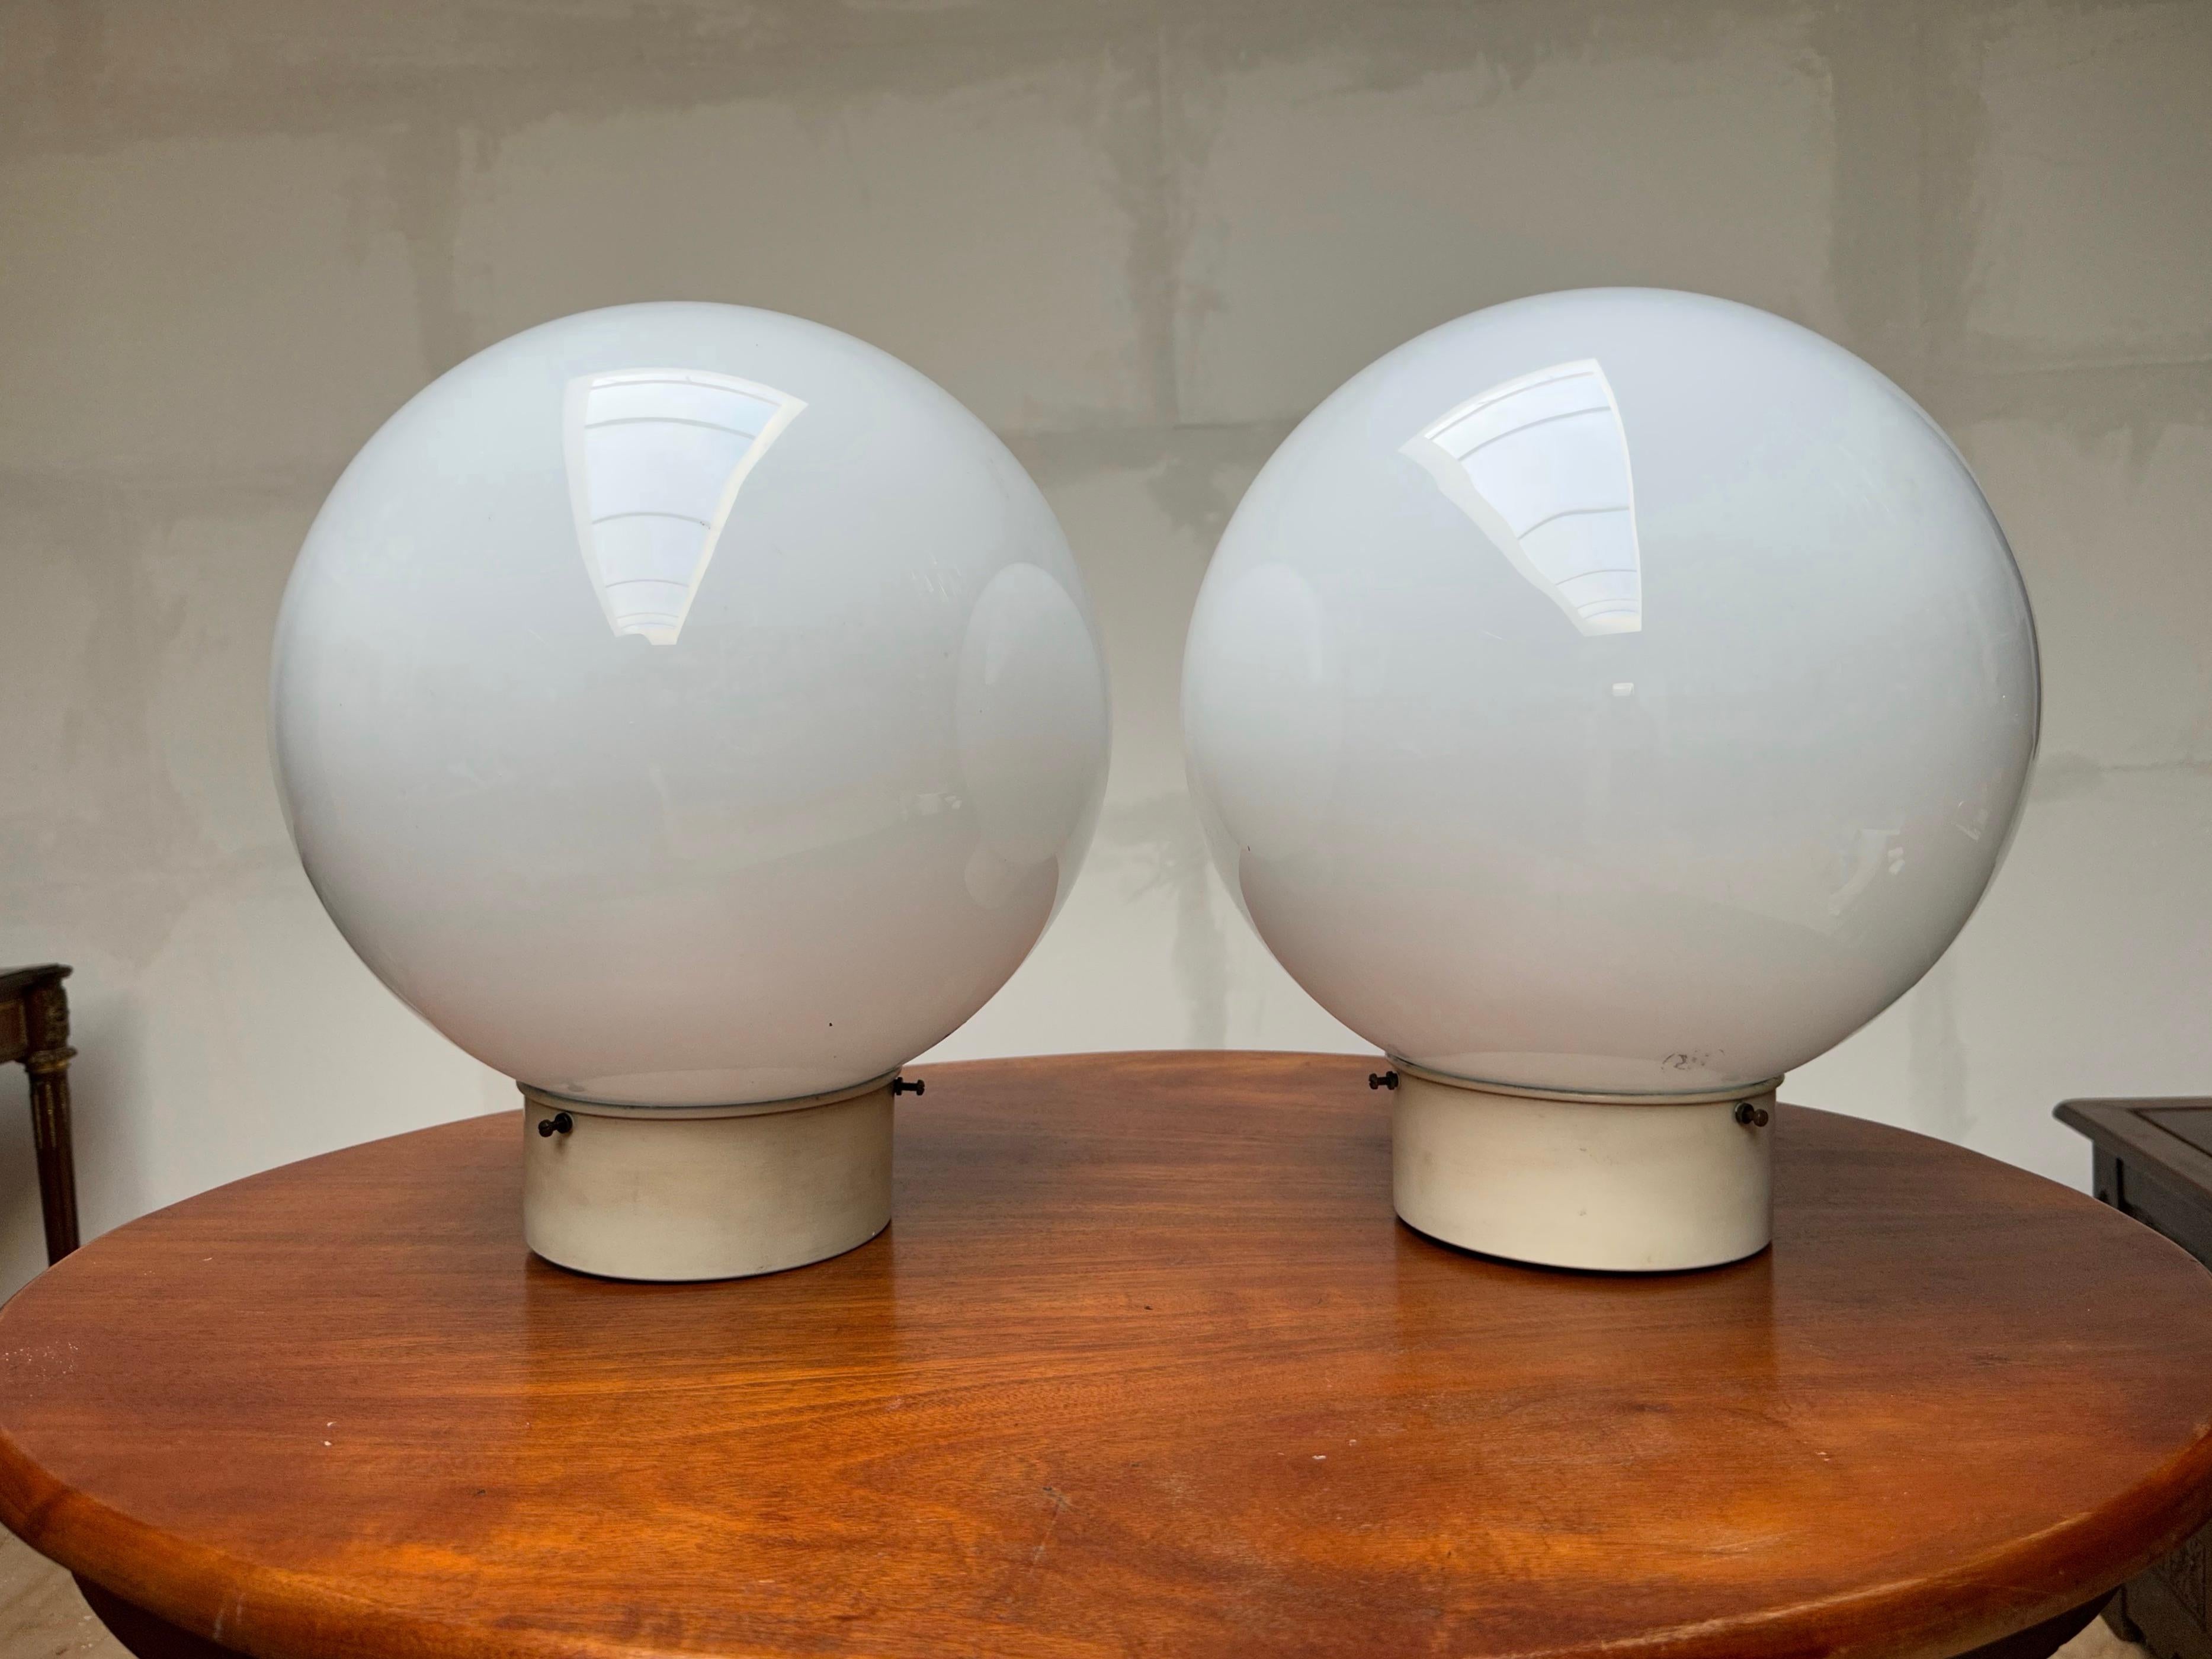 Very cool looking and timeless, European flushmounts from 1950-1960. 3 pairs available.

These midcentury opaline glass flush mounts have a very pleasing-to-the-eye design and their timelessness make them suitable for other kinds of interiors as